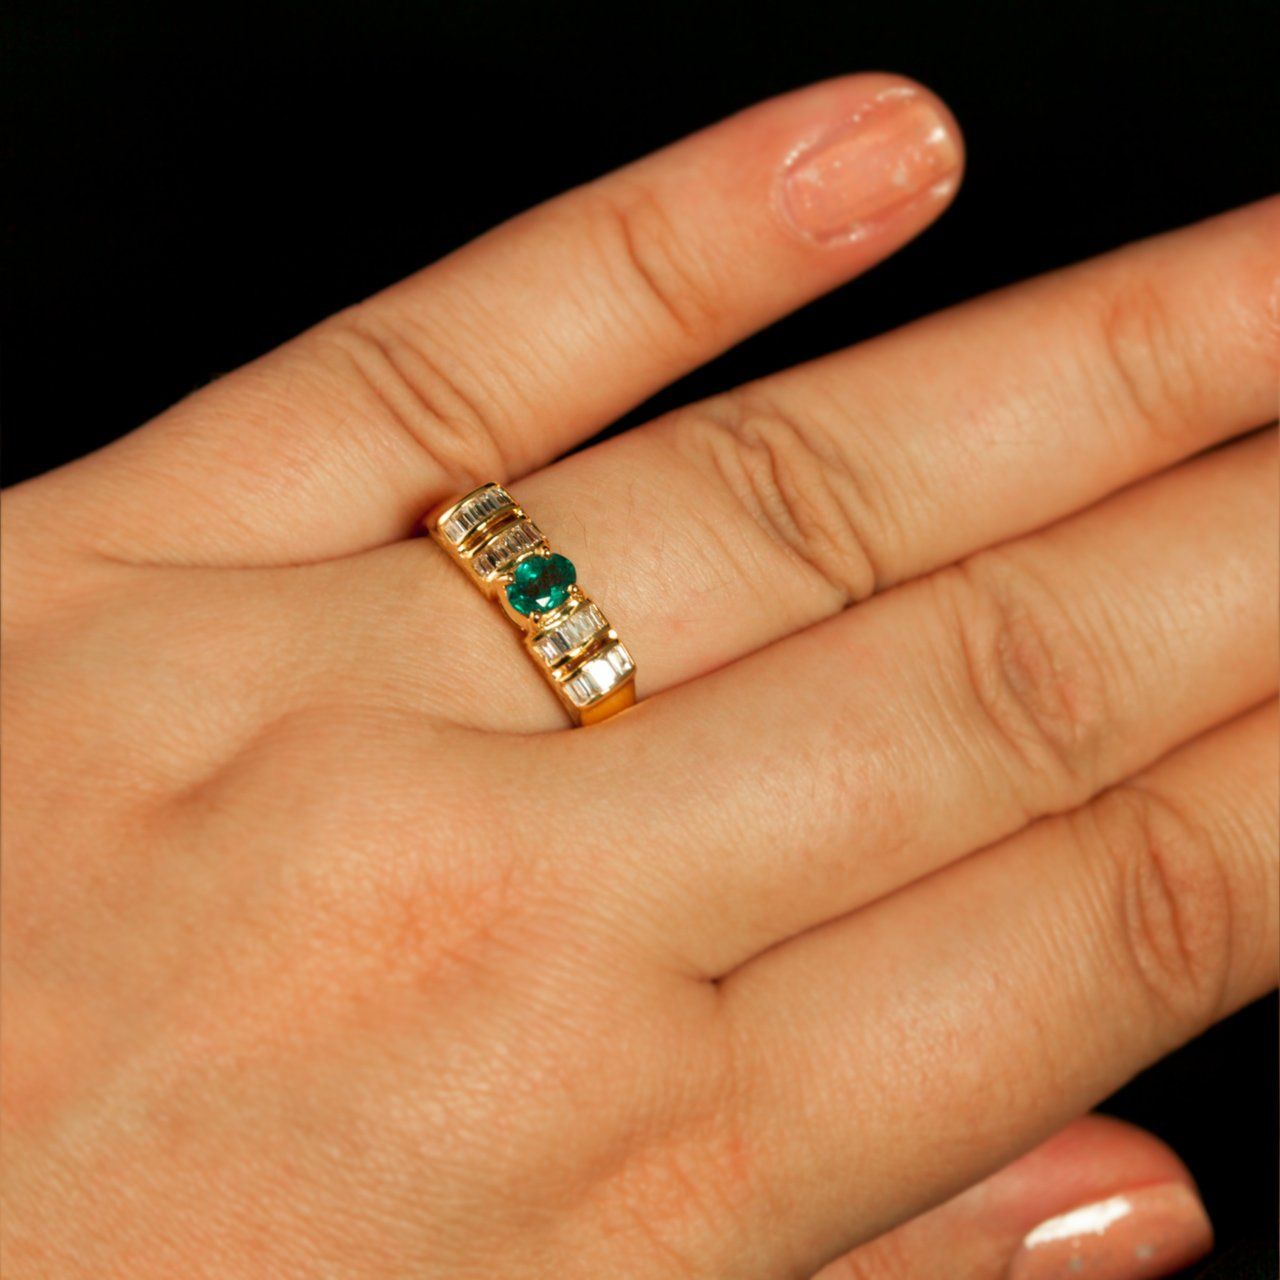 A woman's hand adorned with the 18k yellow gold ring with a 0.37ct natural alexandrite